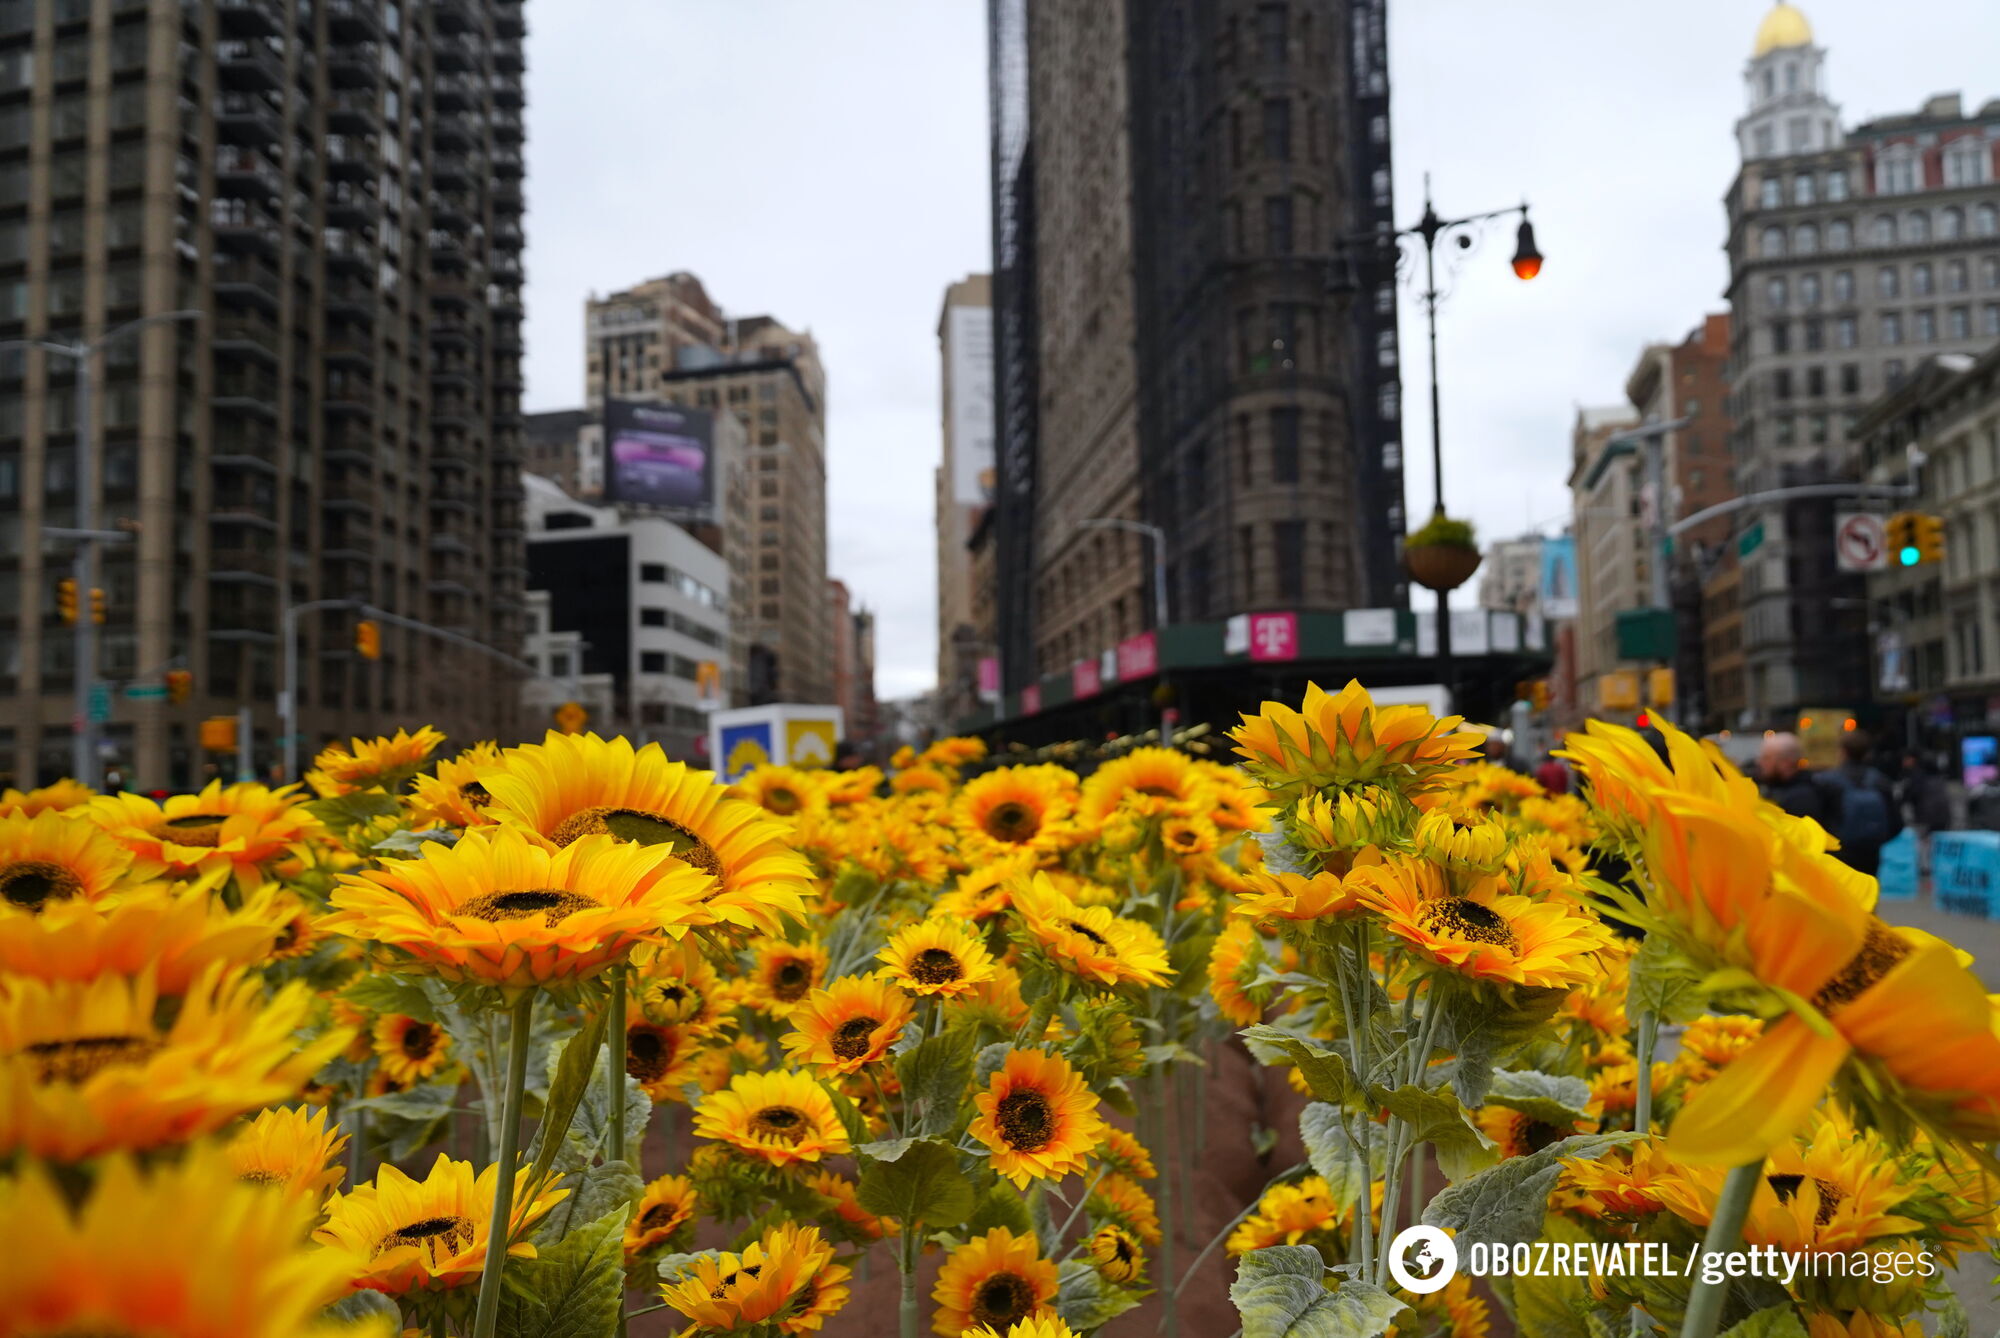 An installation with 333 sunflowers was installed in the heart of New York on the occasion of Ukraine's Sobornosti Day. Photo